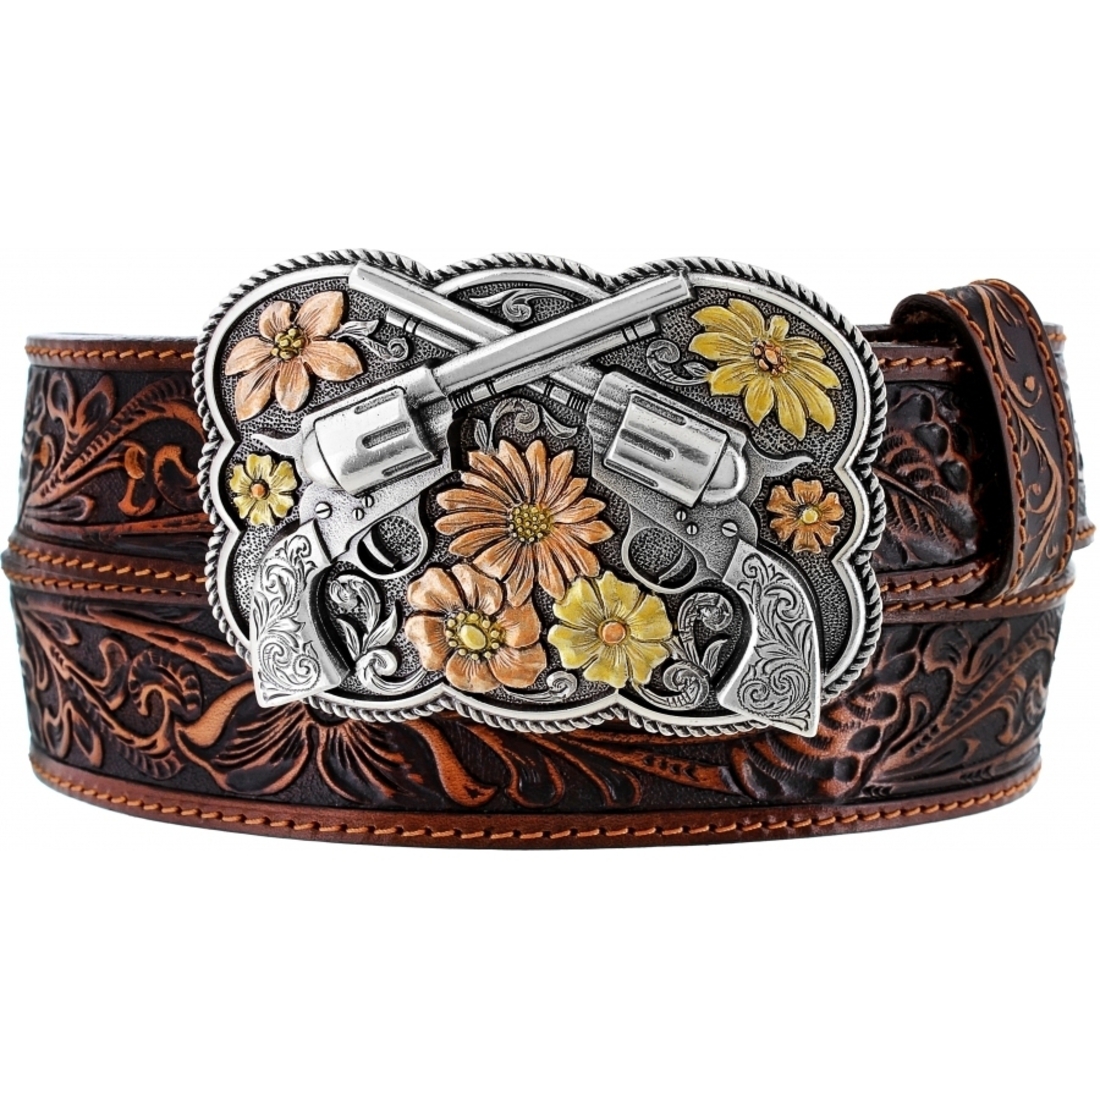 Tony Lama Western Womens Belt Leather Brown Pistols Made In The USA C51155 | eBay